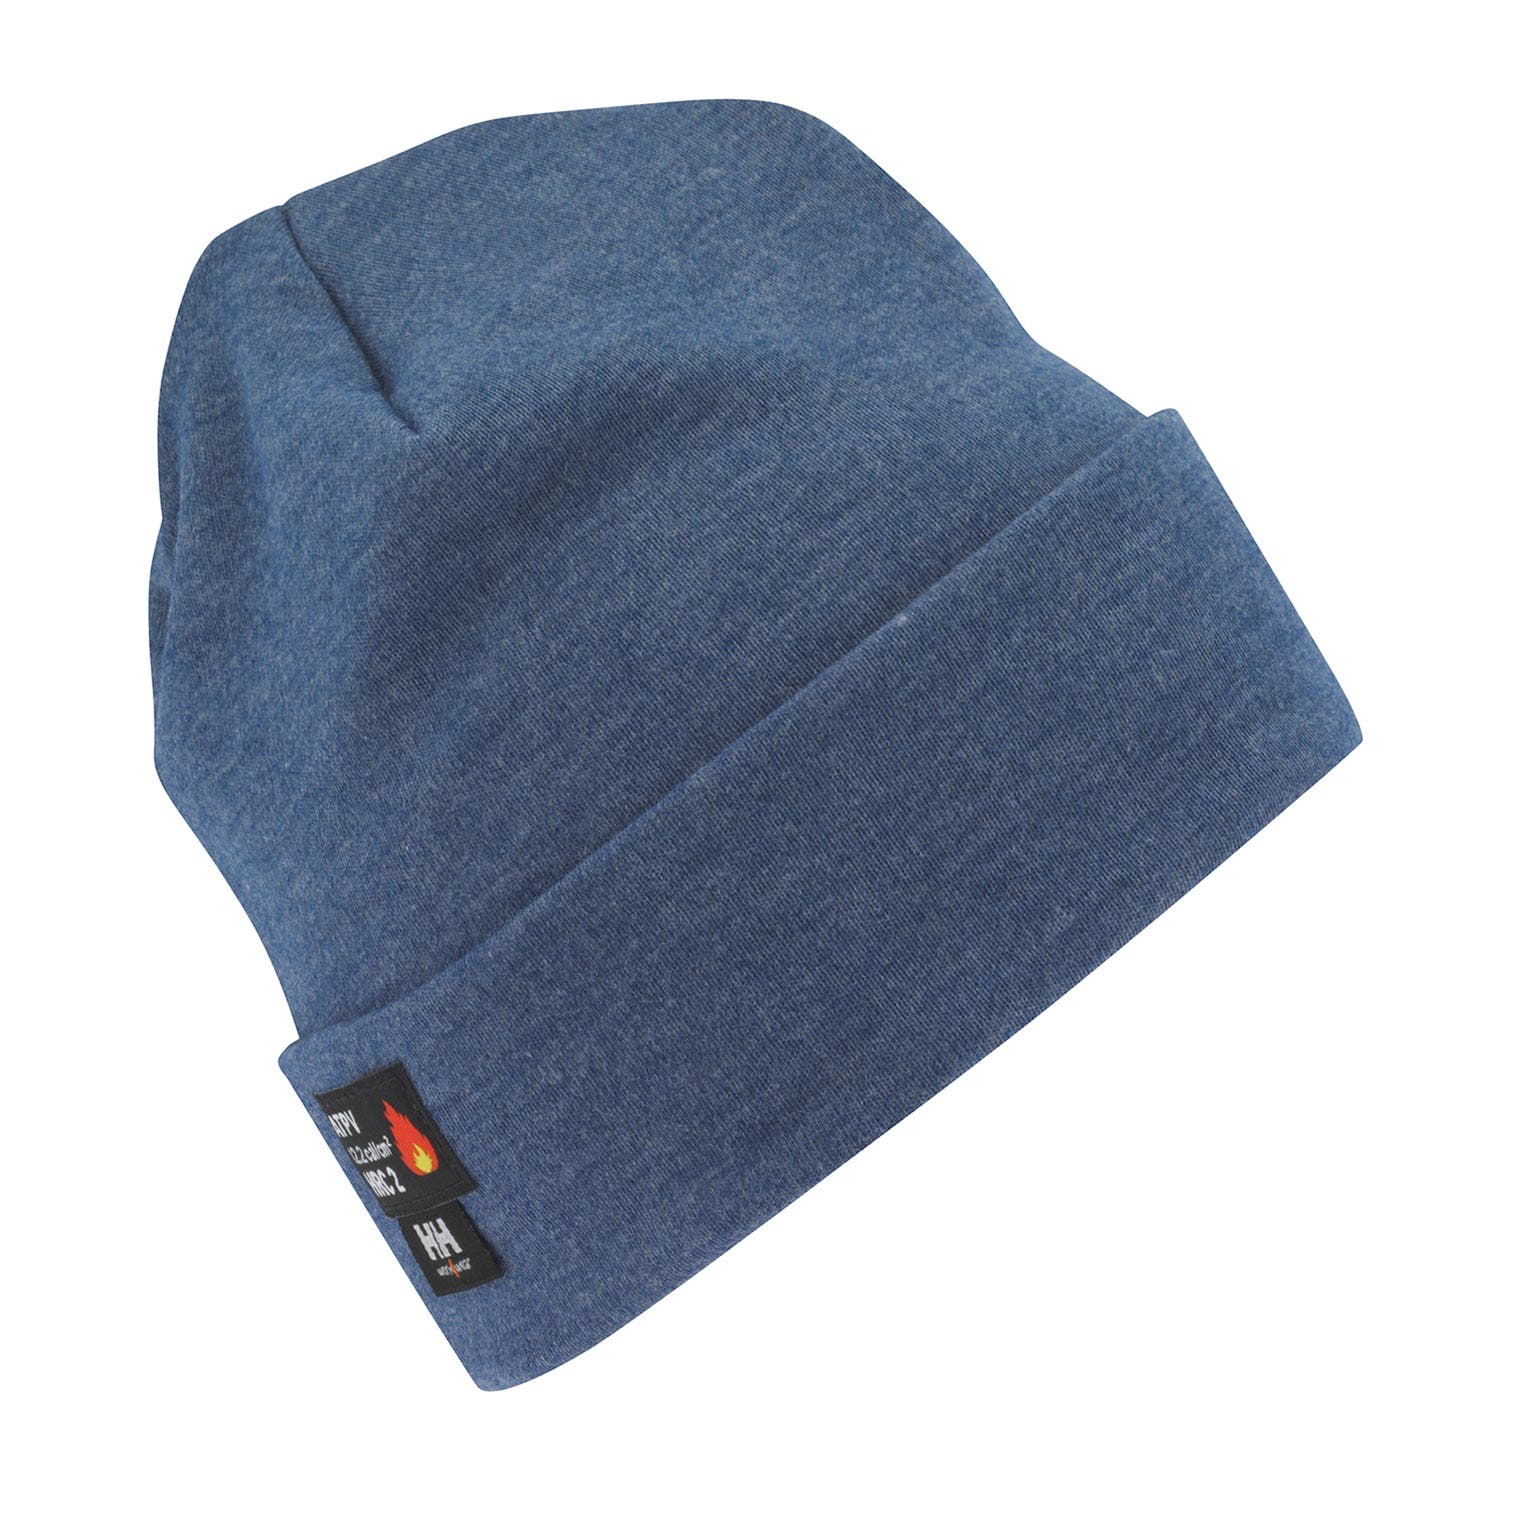 Helly Hansen Unisex Fargo Flame Retardant Tuque Hat in Navy from the front